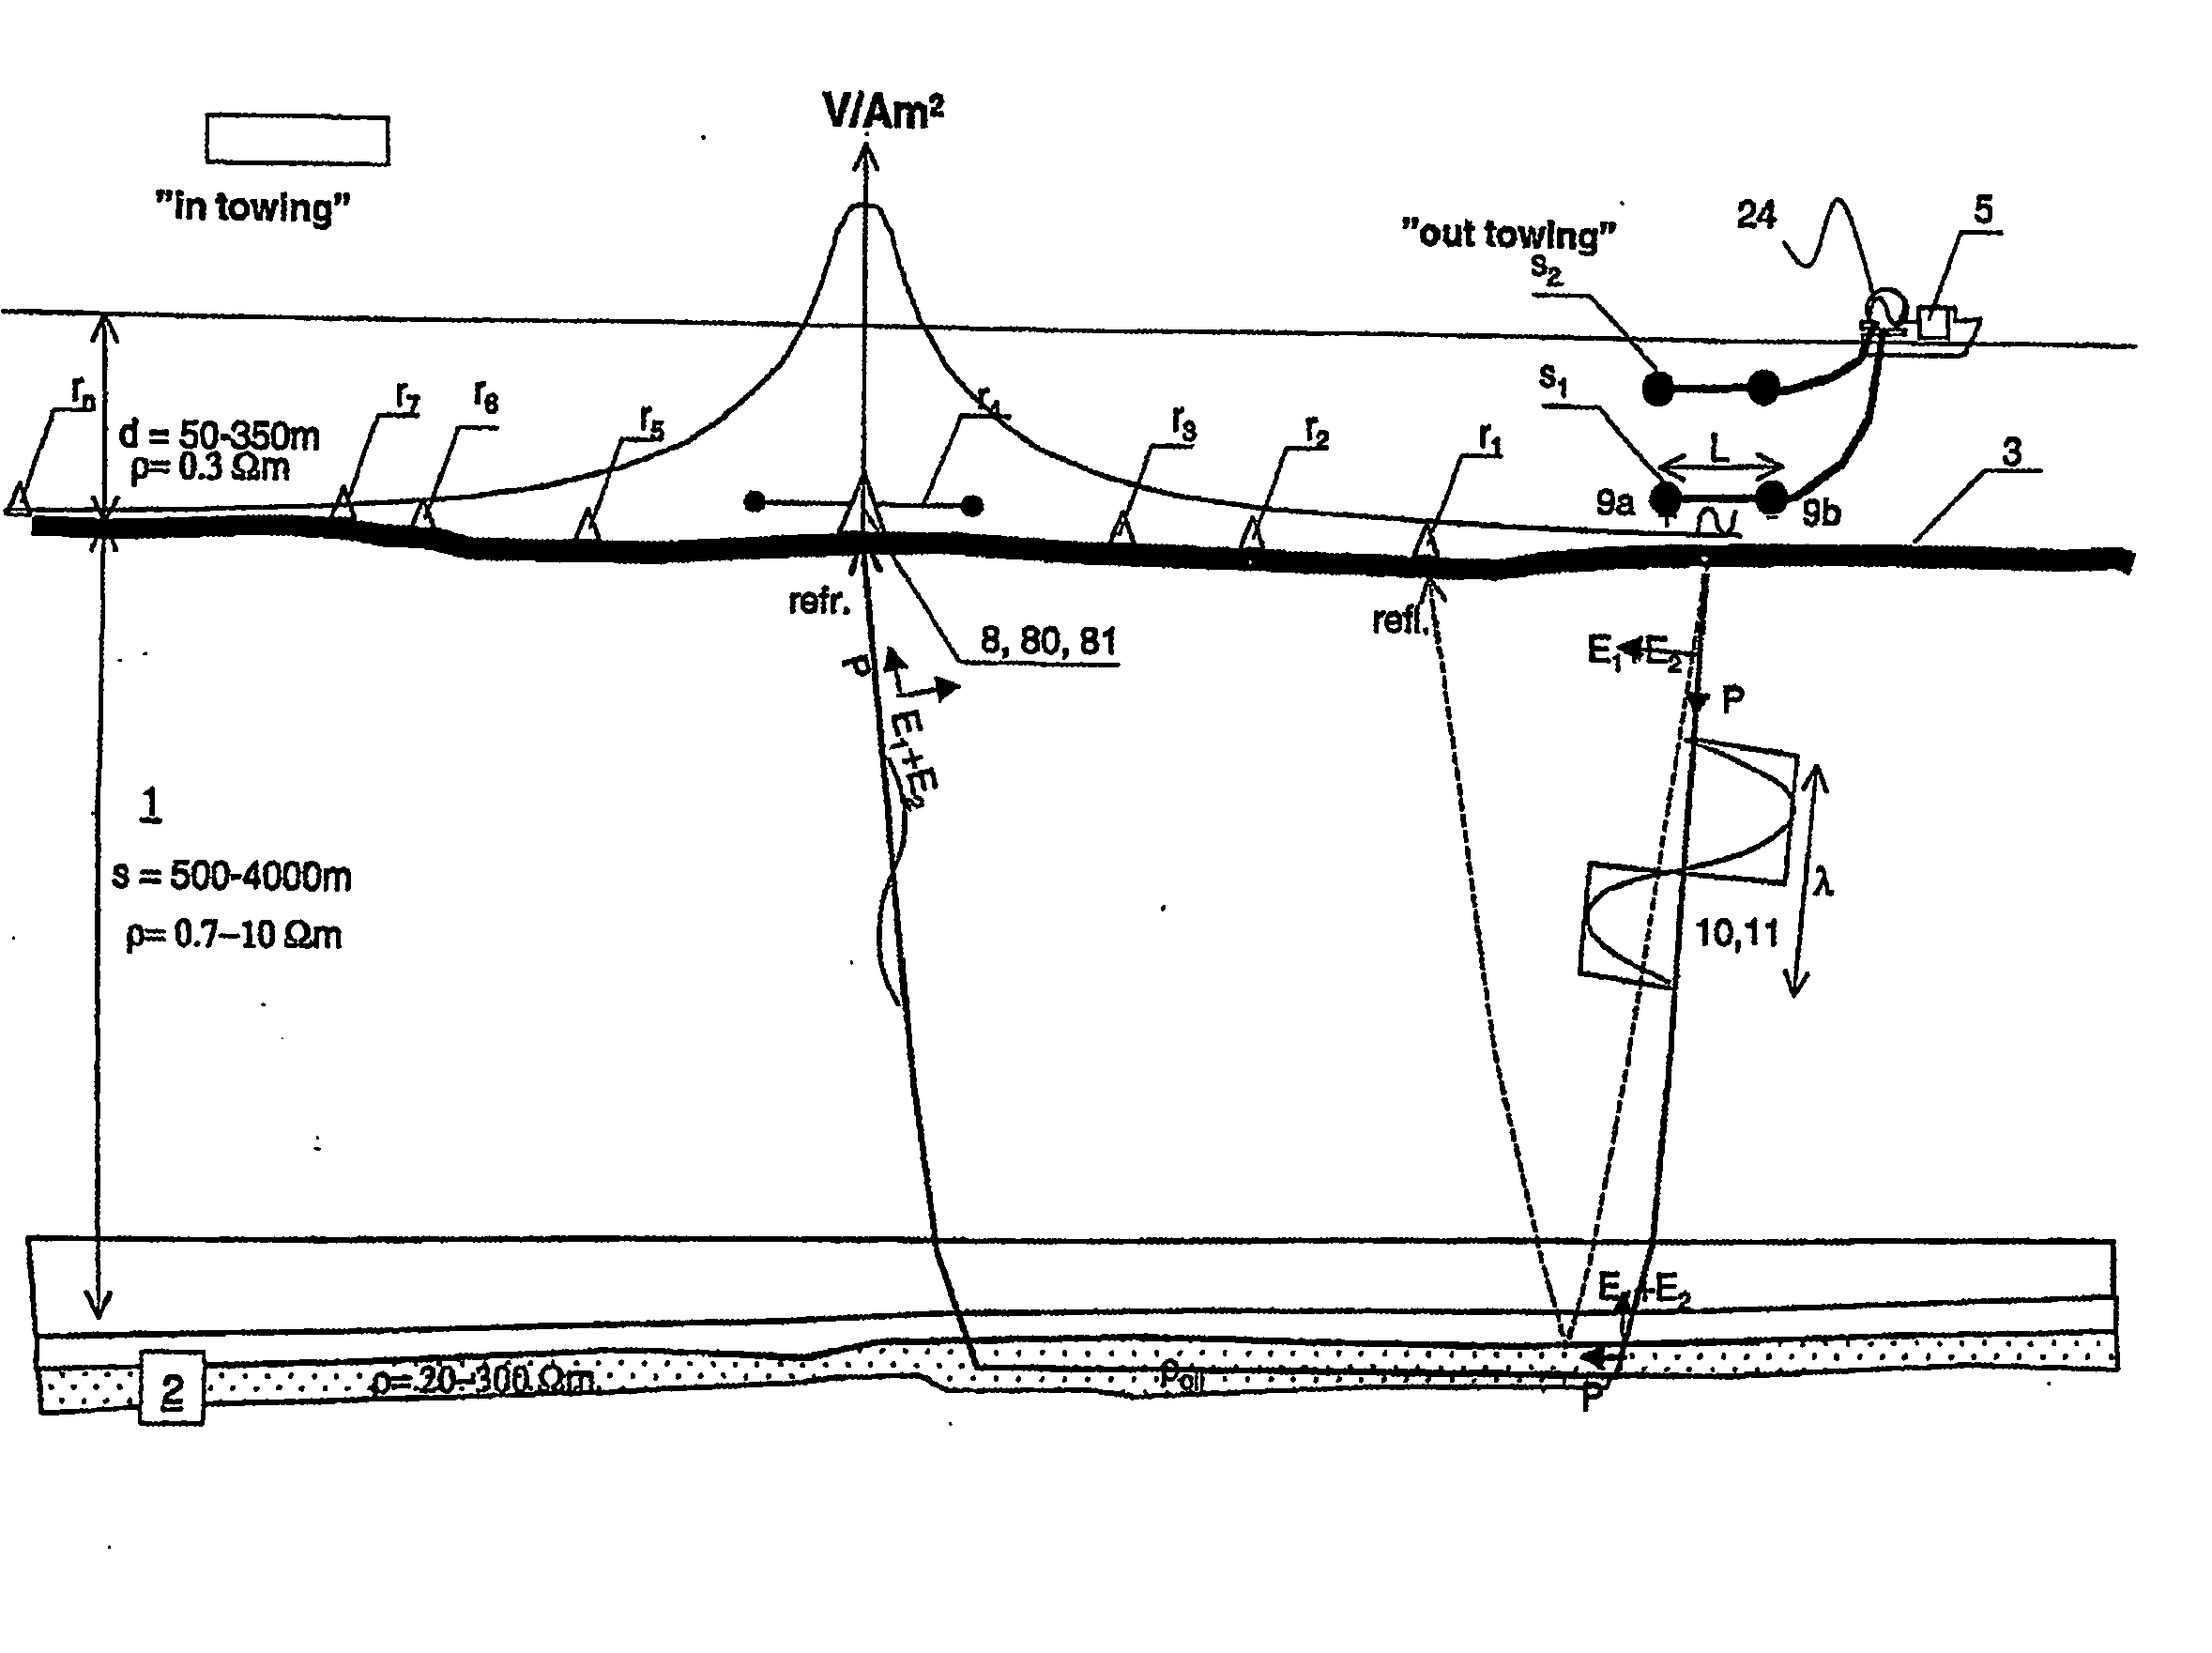 Method for Electromagnetic Geophysical Surveying of Subsea Rock Formations